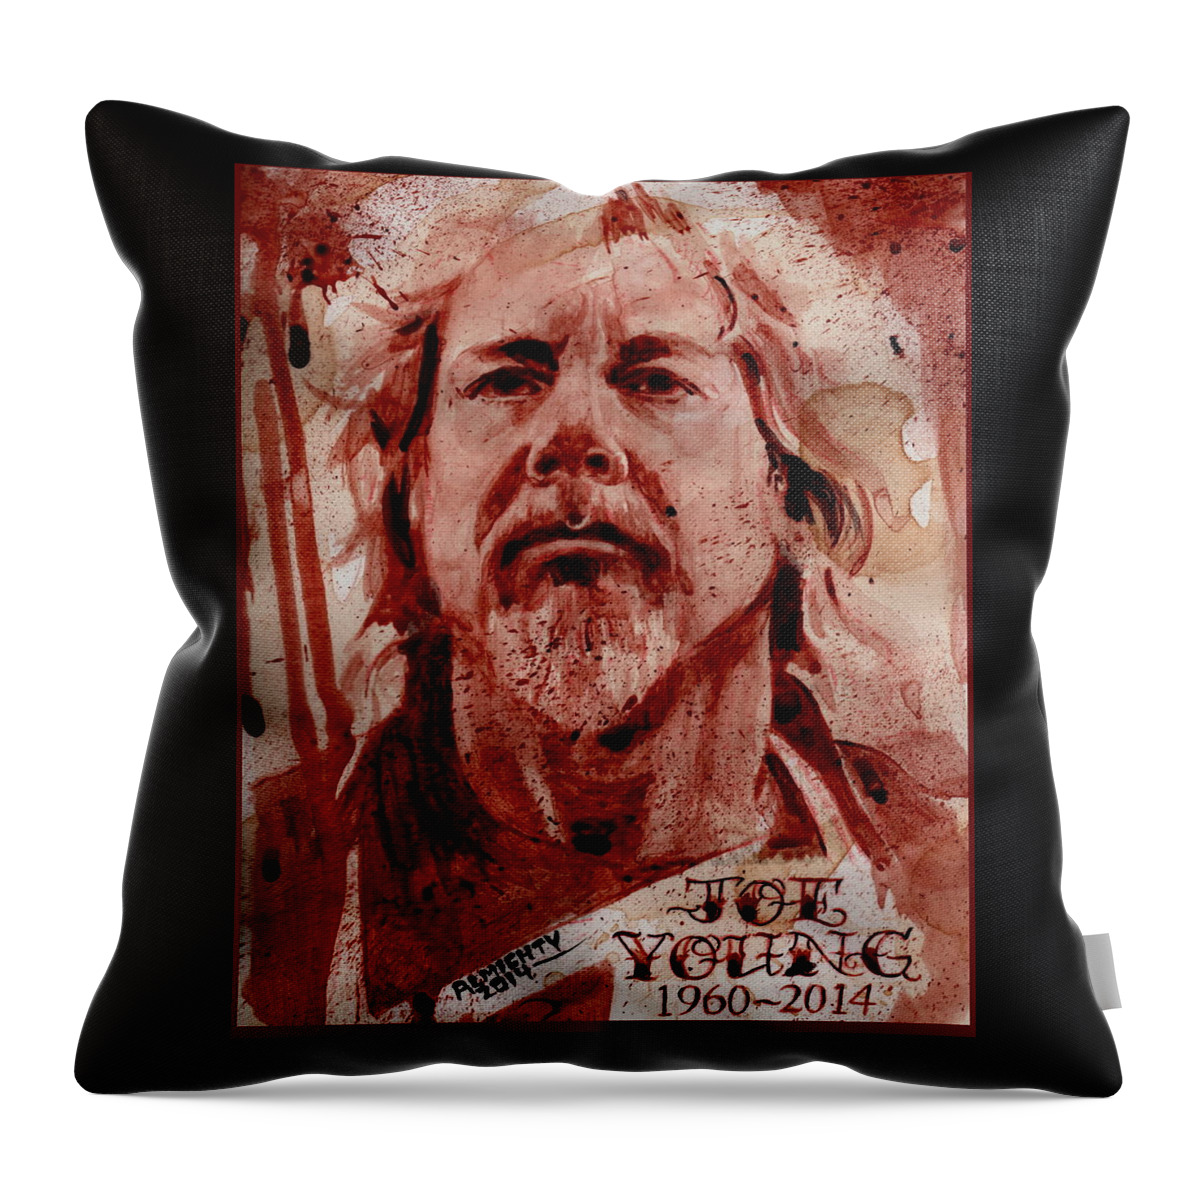 Antiseen Throw Pillow featuring the painting JOE YOUNG - ANTiSEEN by Ryan Almighty